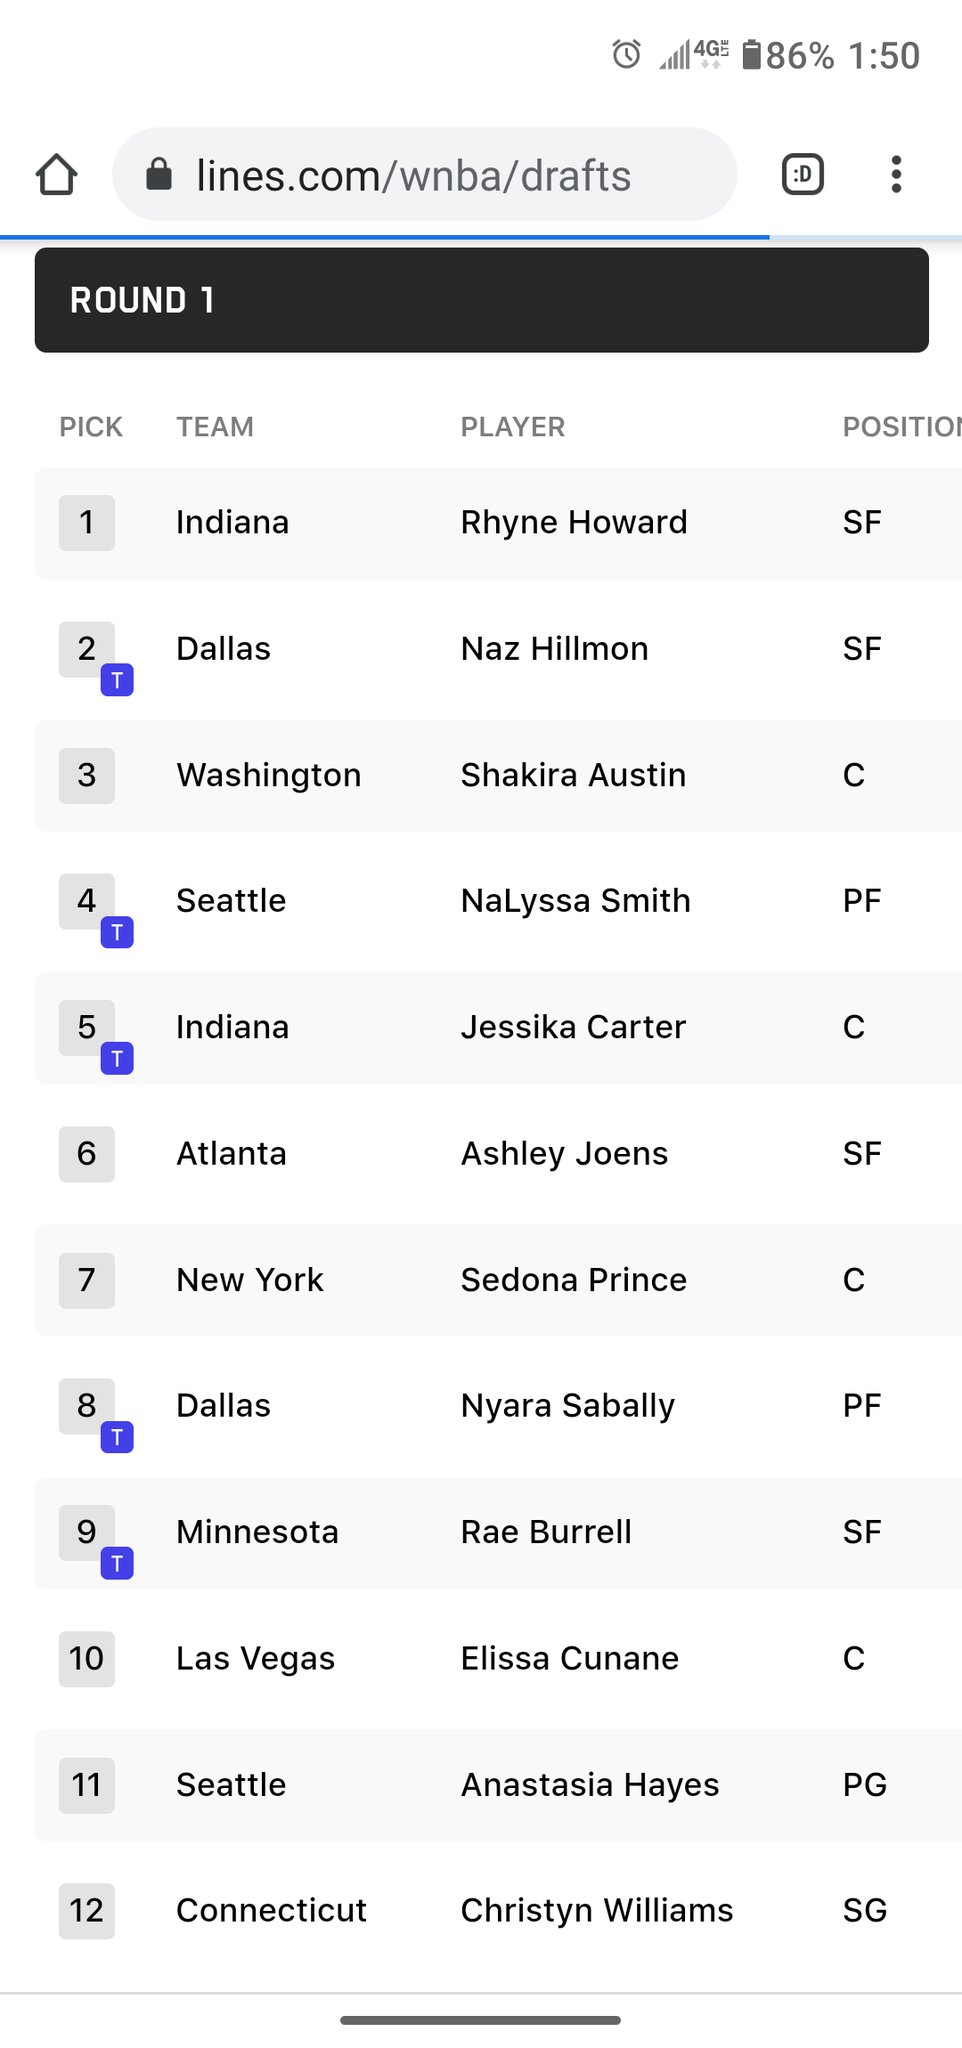 Todd Roman on Twitter "Updated 2022 WNBA Mock Draft based on the